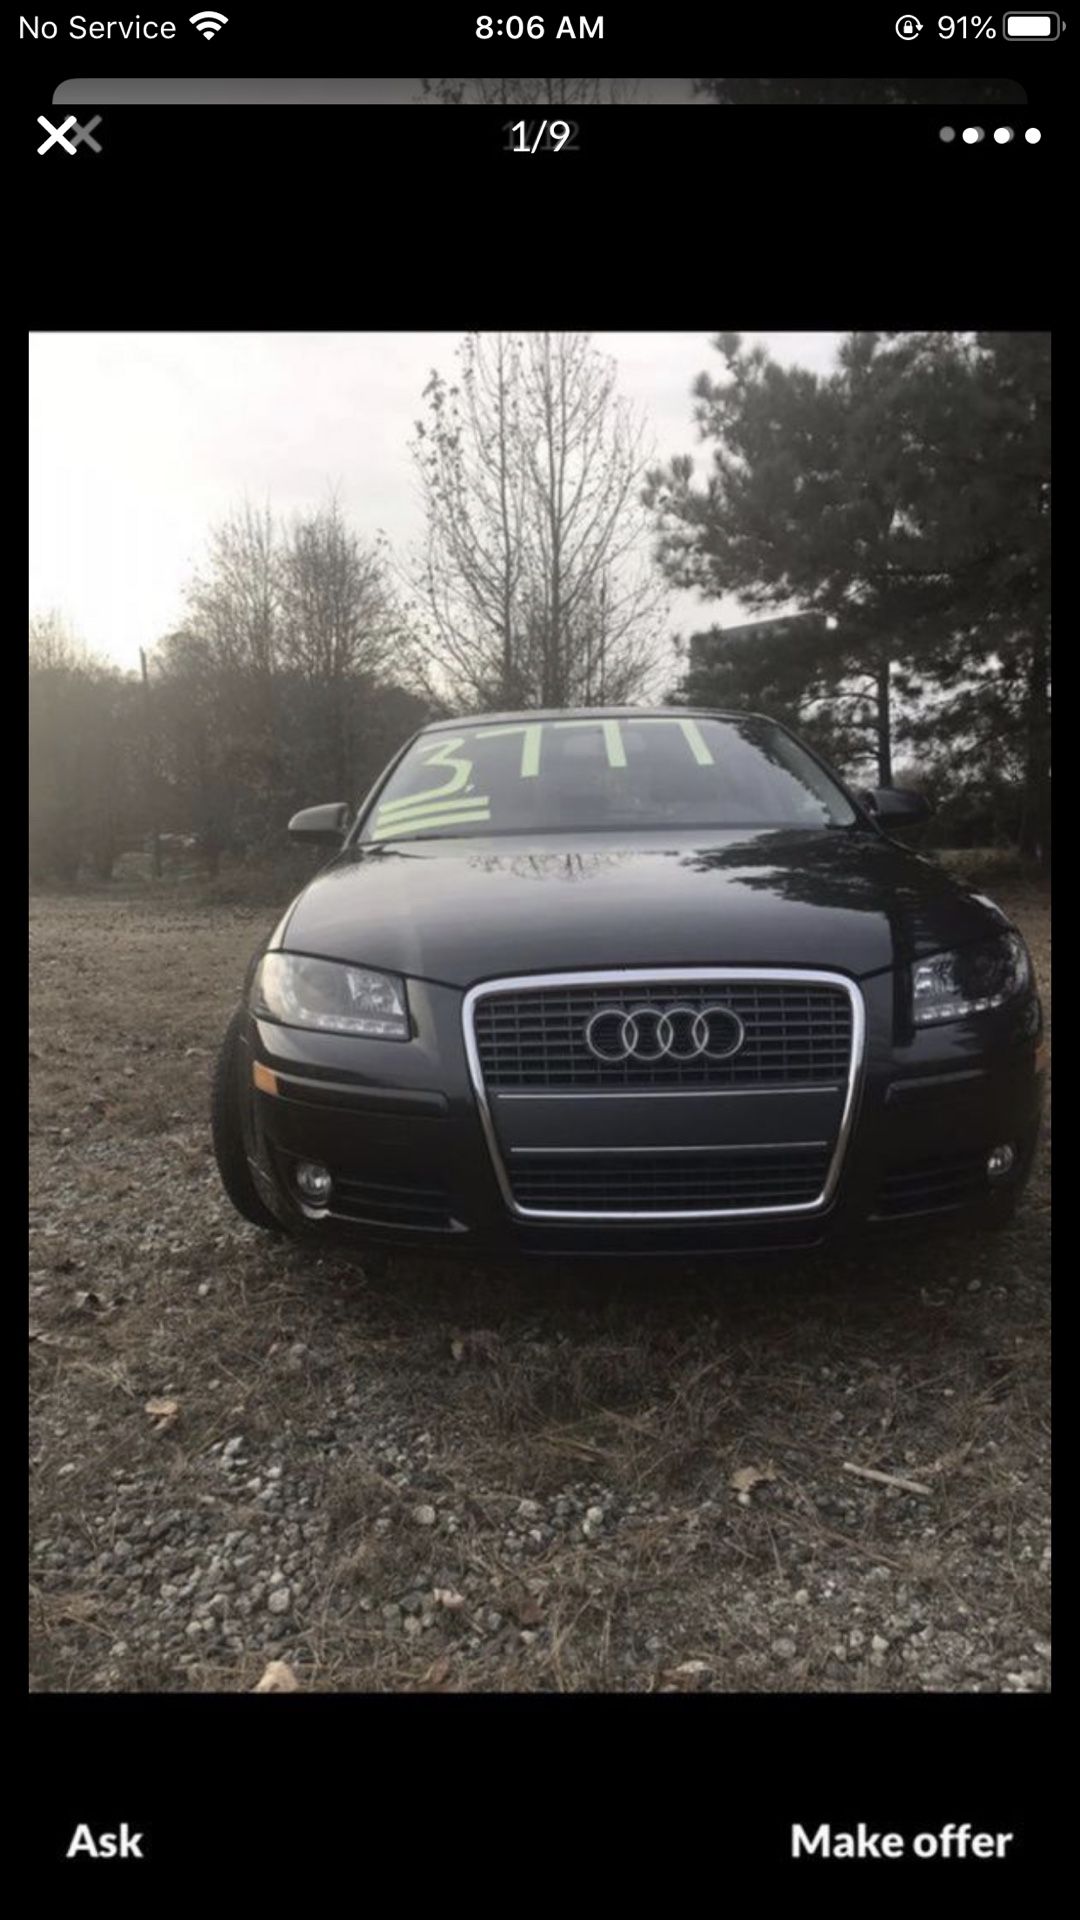 2007 Audi A-3 FWD 2.0 turbocharge heated seats Power Windows, Doors, Mirrored, Alloy Wheels,AM/FM Radio with CD, as well as, Cruise Control.